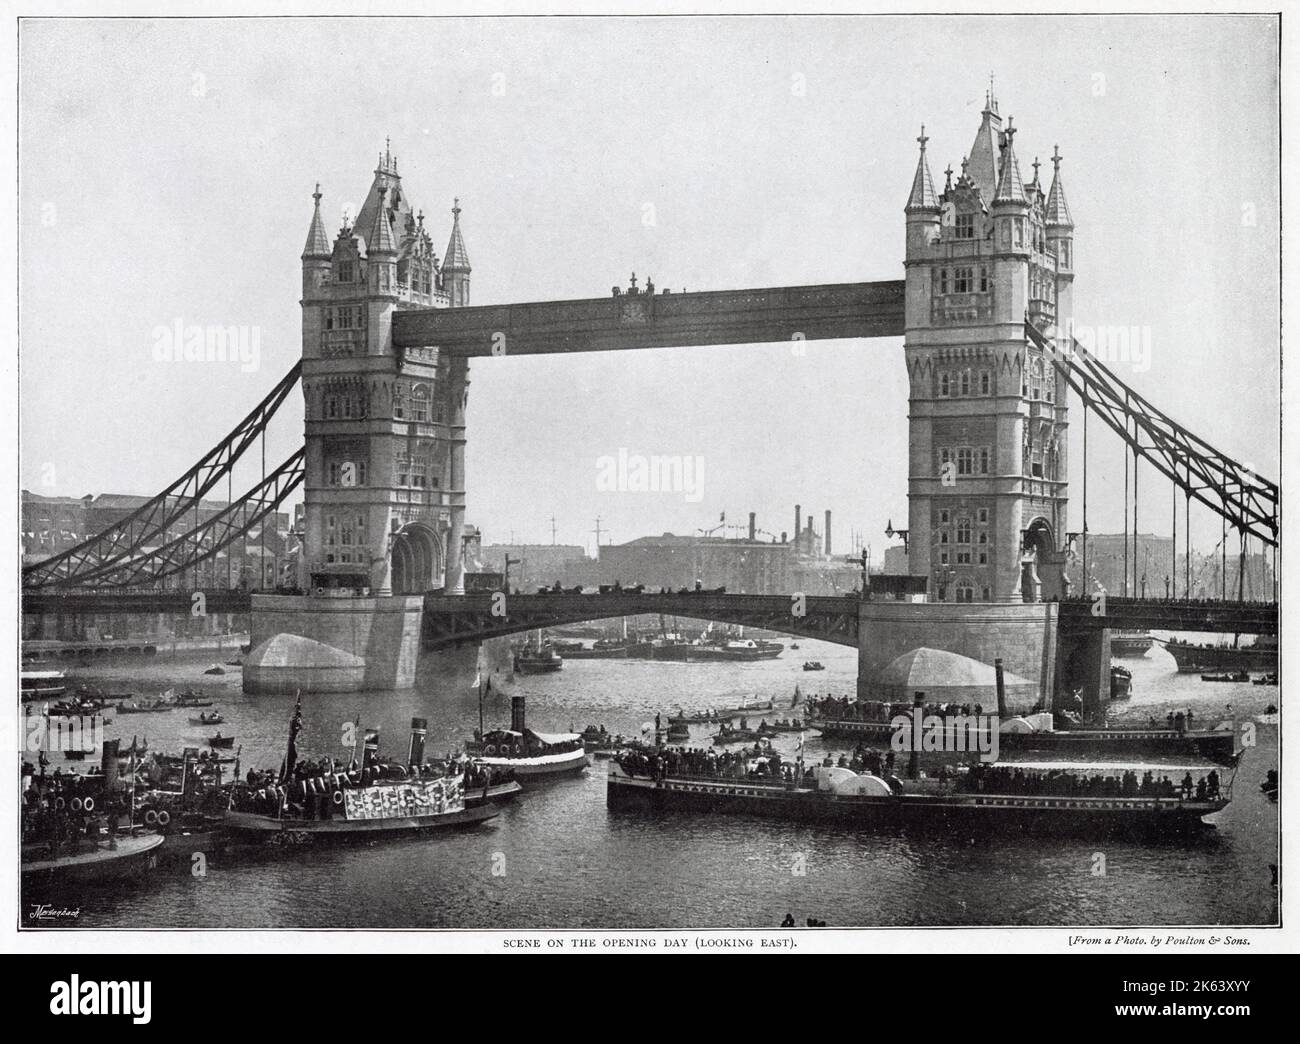 Tower Bridge was designed by Sir Horace Jones and Mr. Wolfe Barry, comprises a permanent footway 142ft above high-water level and a drawbridge for passing ships. Photograph showing the day of opening with crowds of people watching from boats on the River Thames. Stock Photo